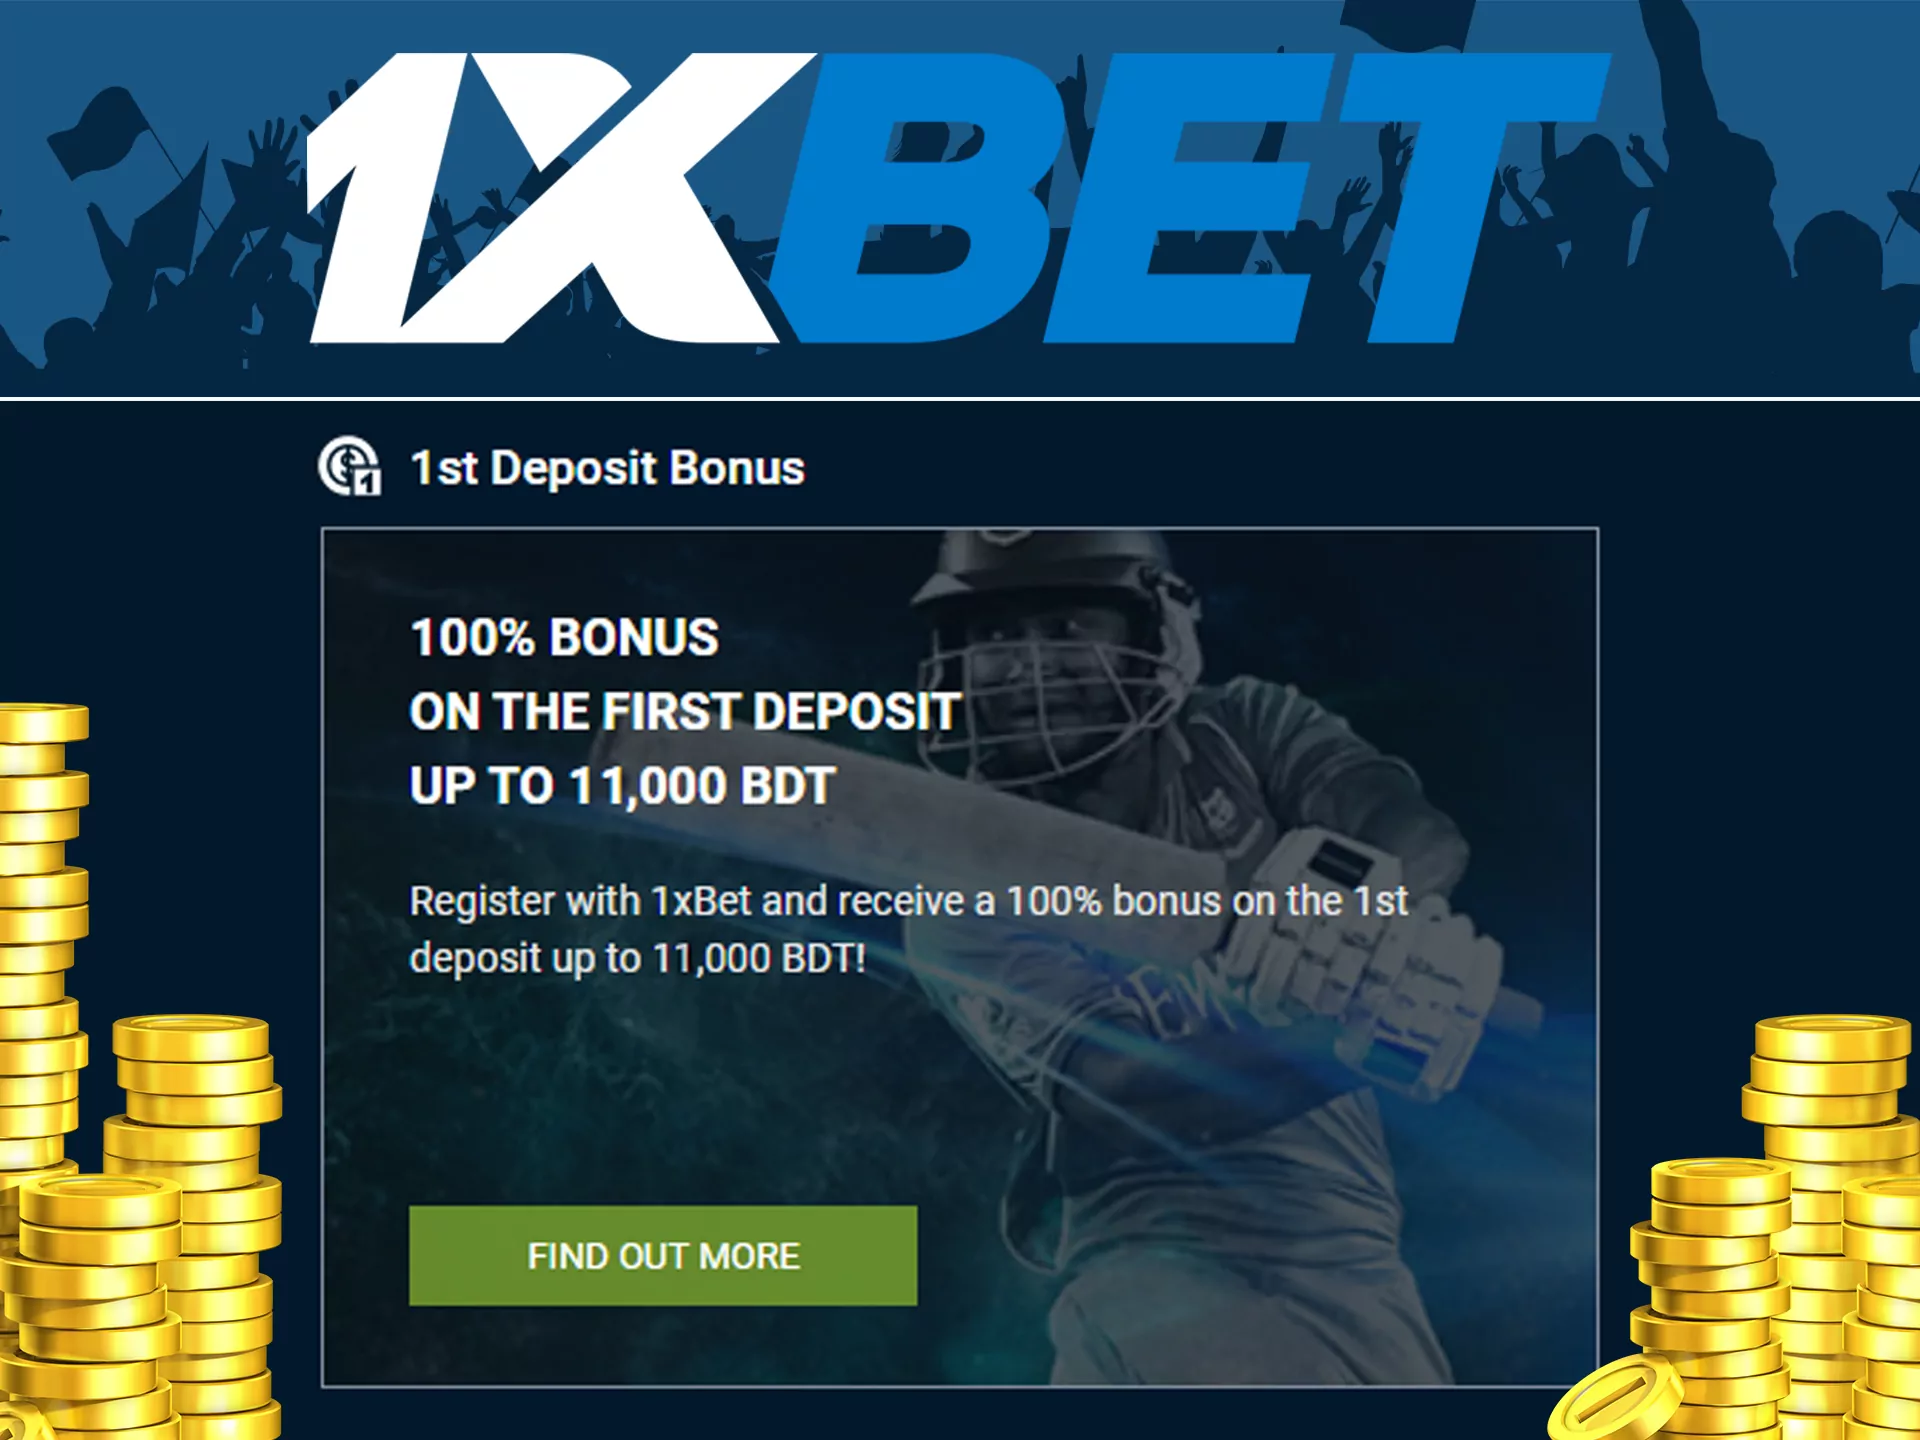 Get free money after first deposit at 1xbet.